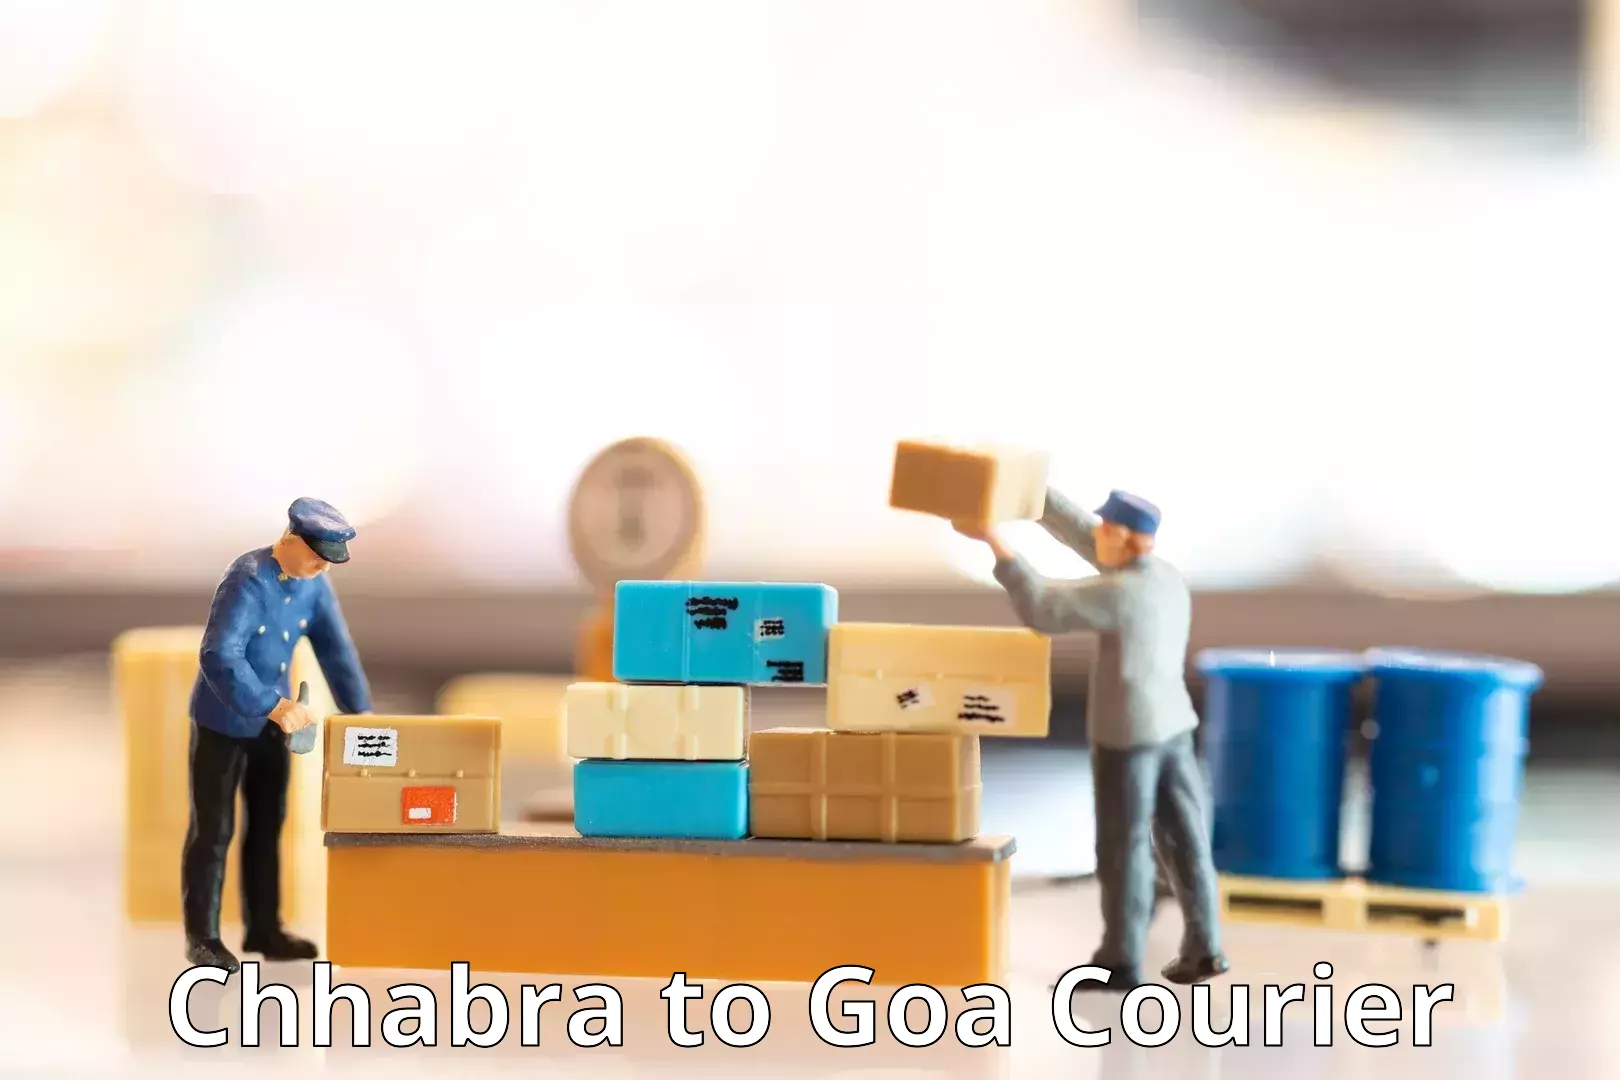 Courier service booking Chhabra to Goa